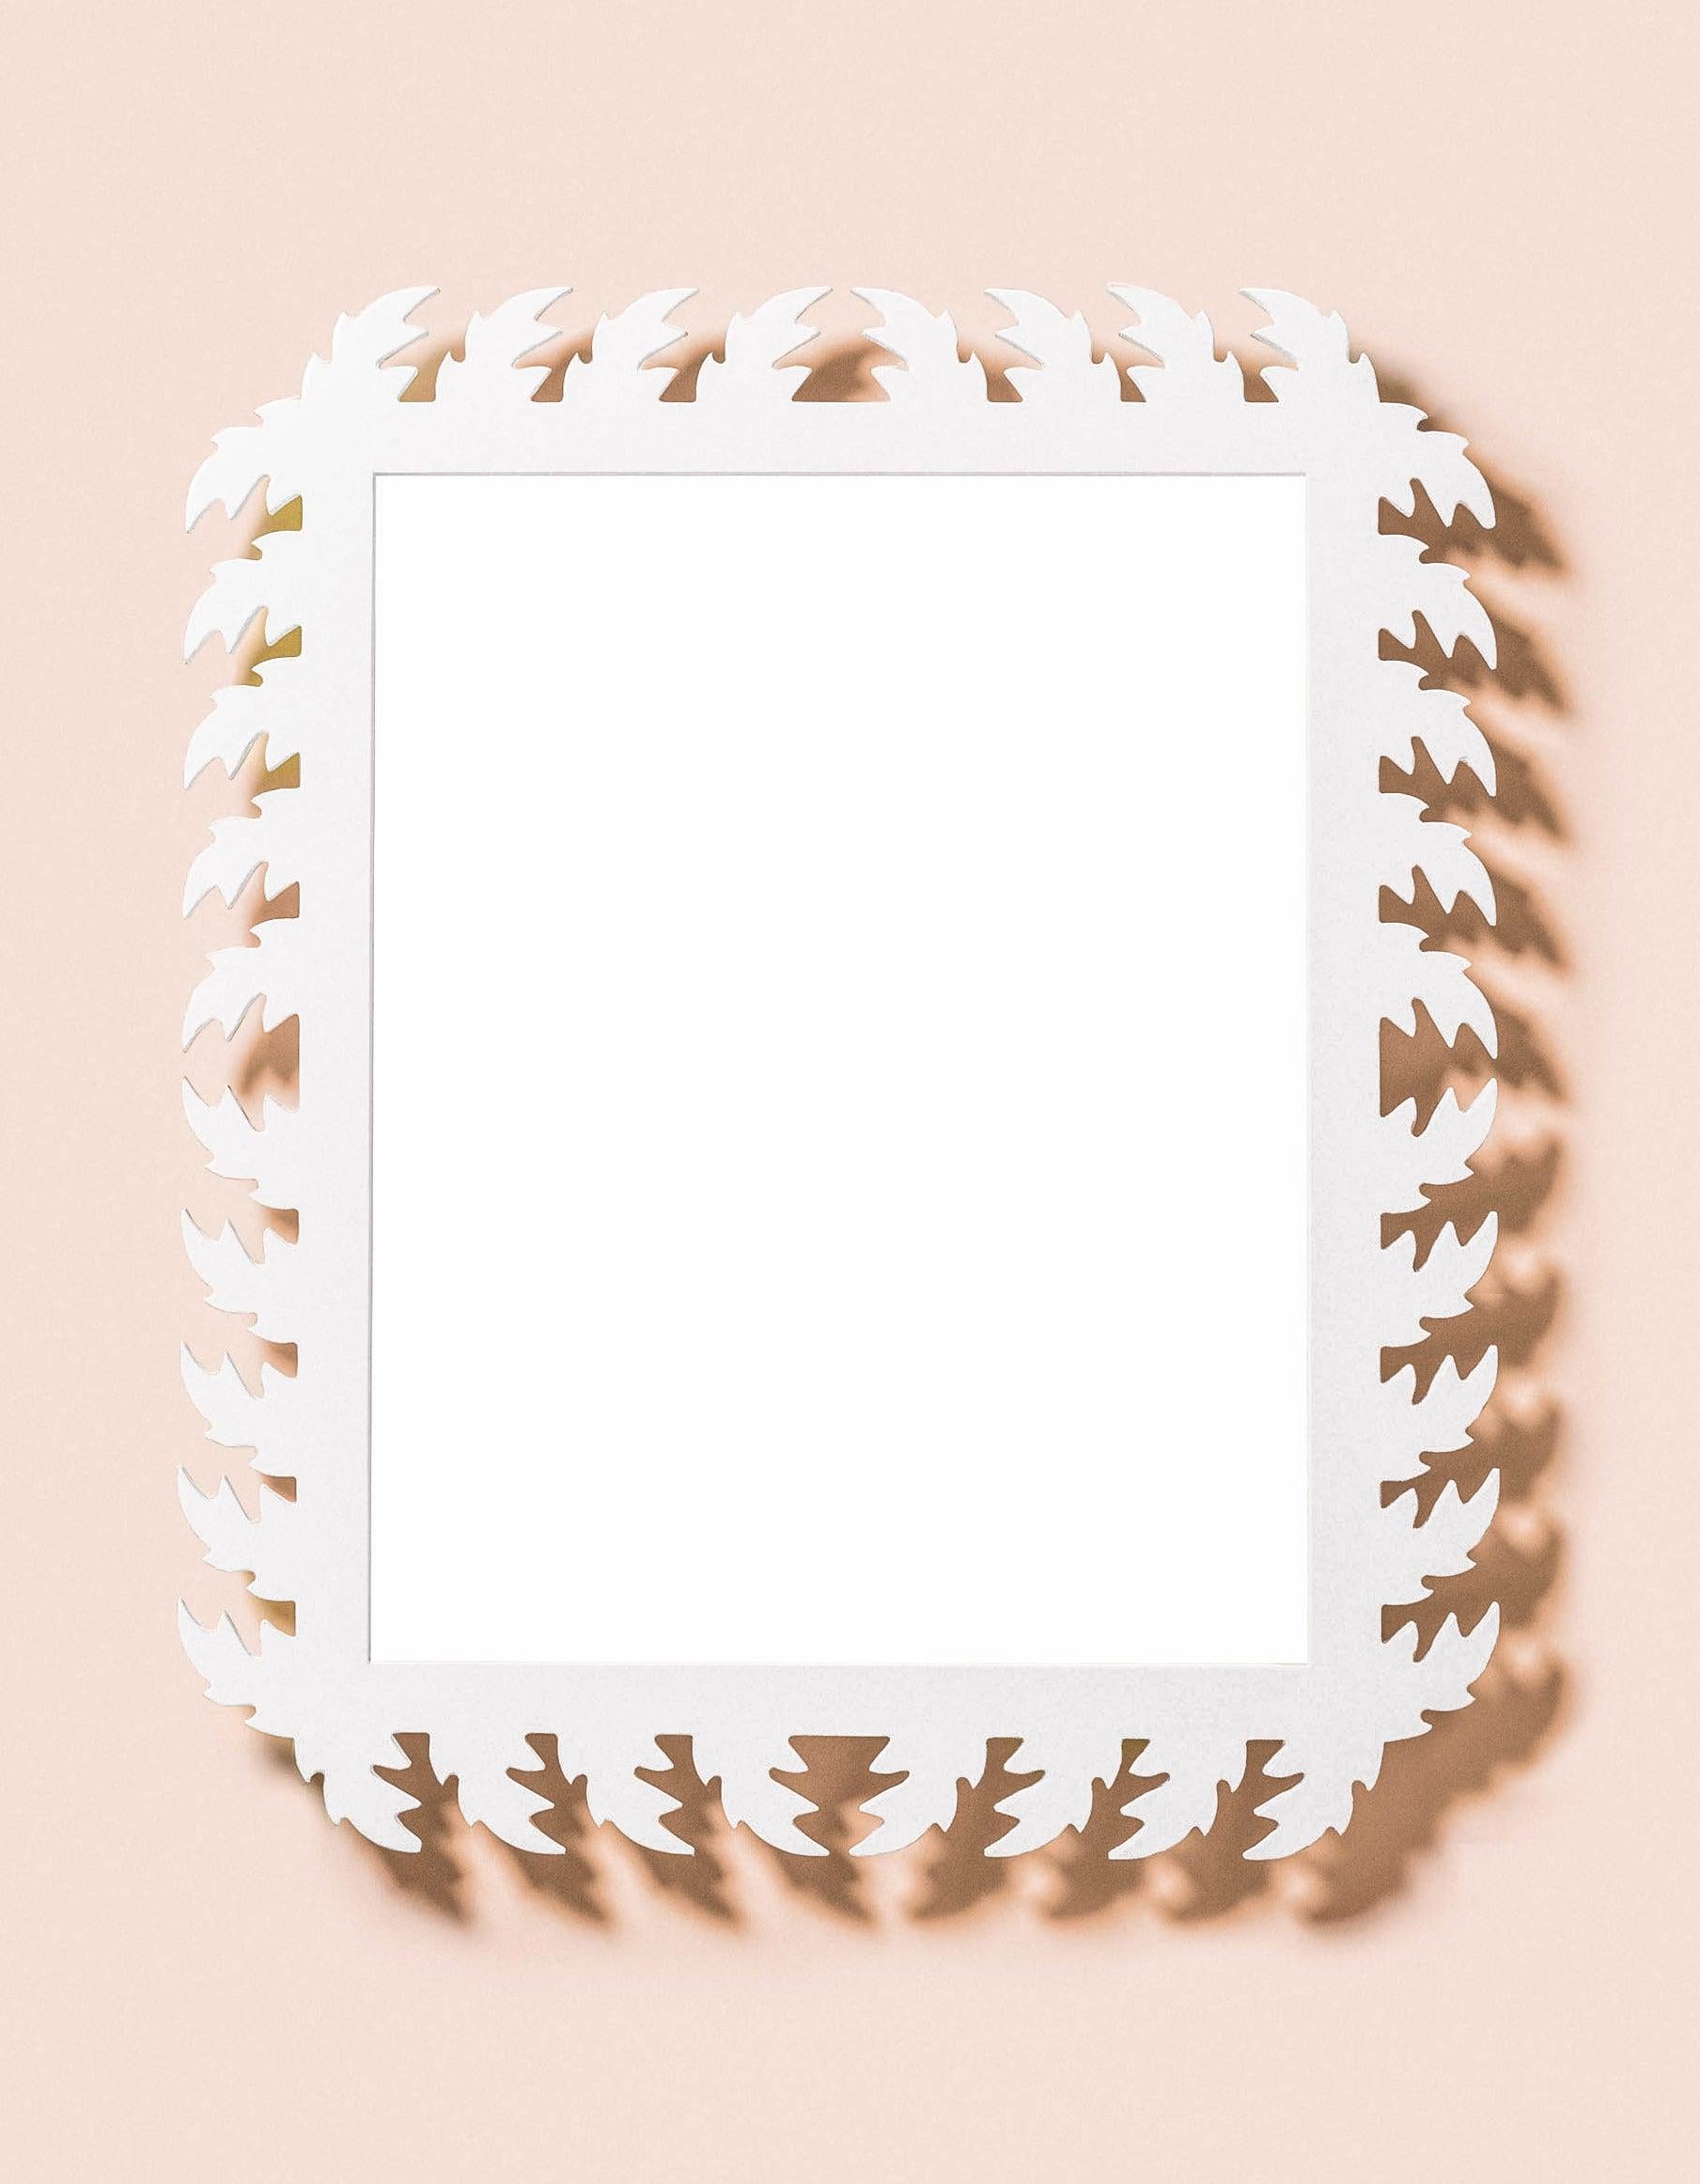 Named for one of our city’s most decadent green spaces, the Audubon’s design pares down the classic Corinthian column capital and celebrates the acanthus leaf with its feathery, organic edges. Just like a visit to Audubon Park, but framed. Measures